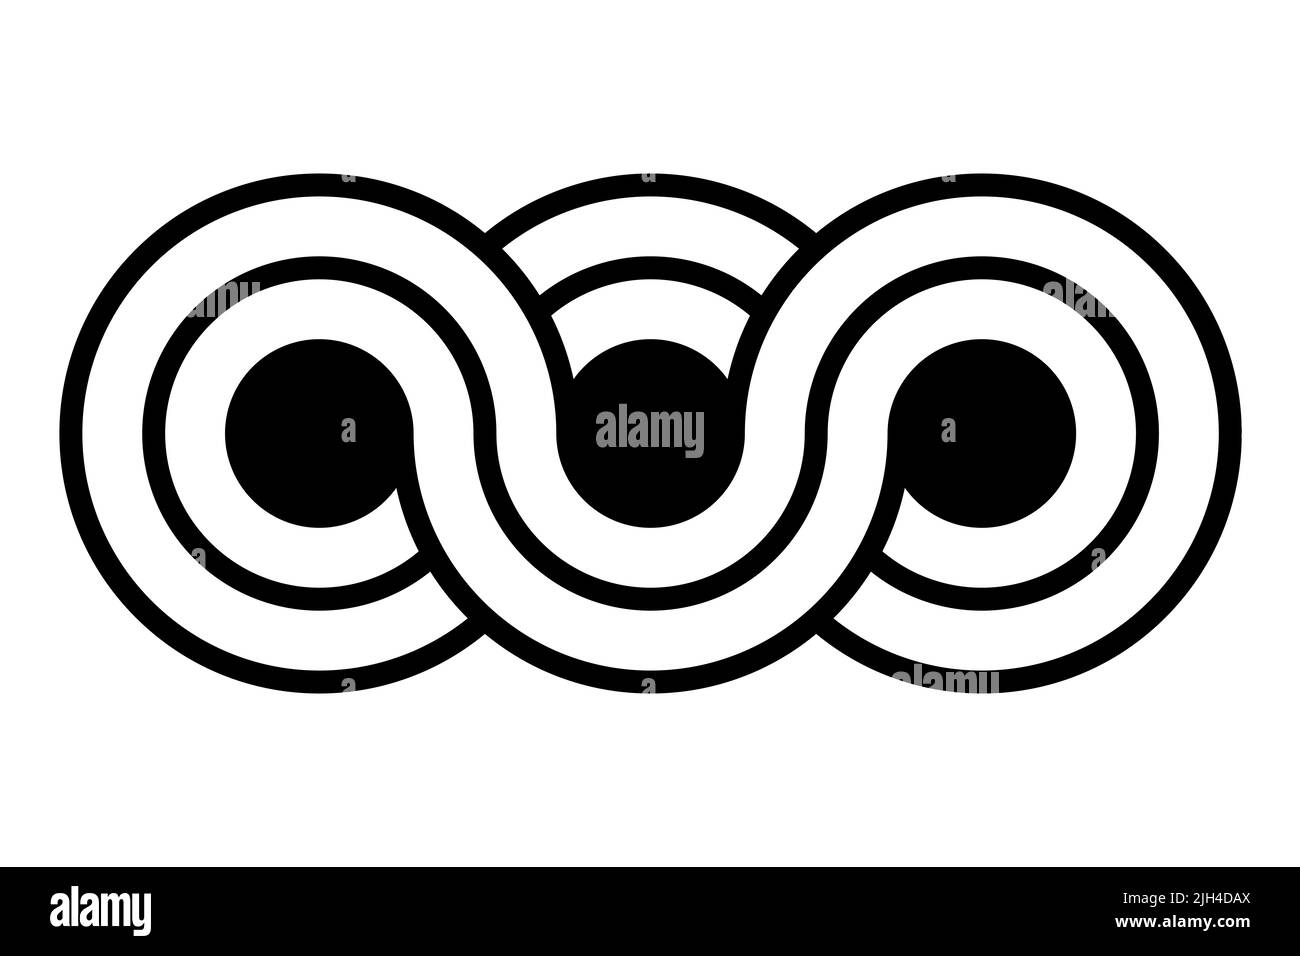 Triple infinity symbol. Three circles with staggered border lines, connected to each other in a wave-like manner and in a loop, expressing infinity. Stock Photo